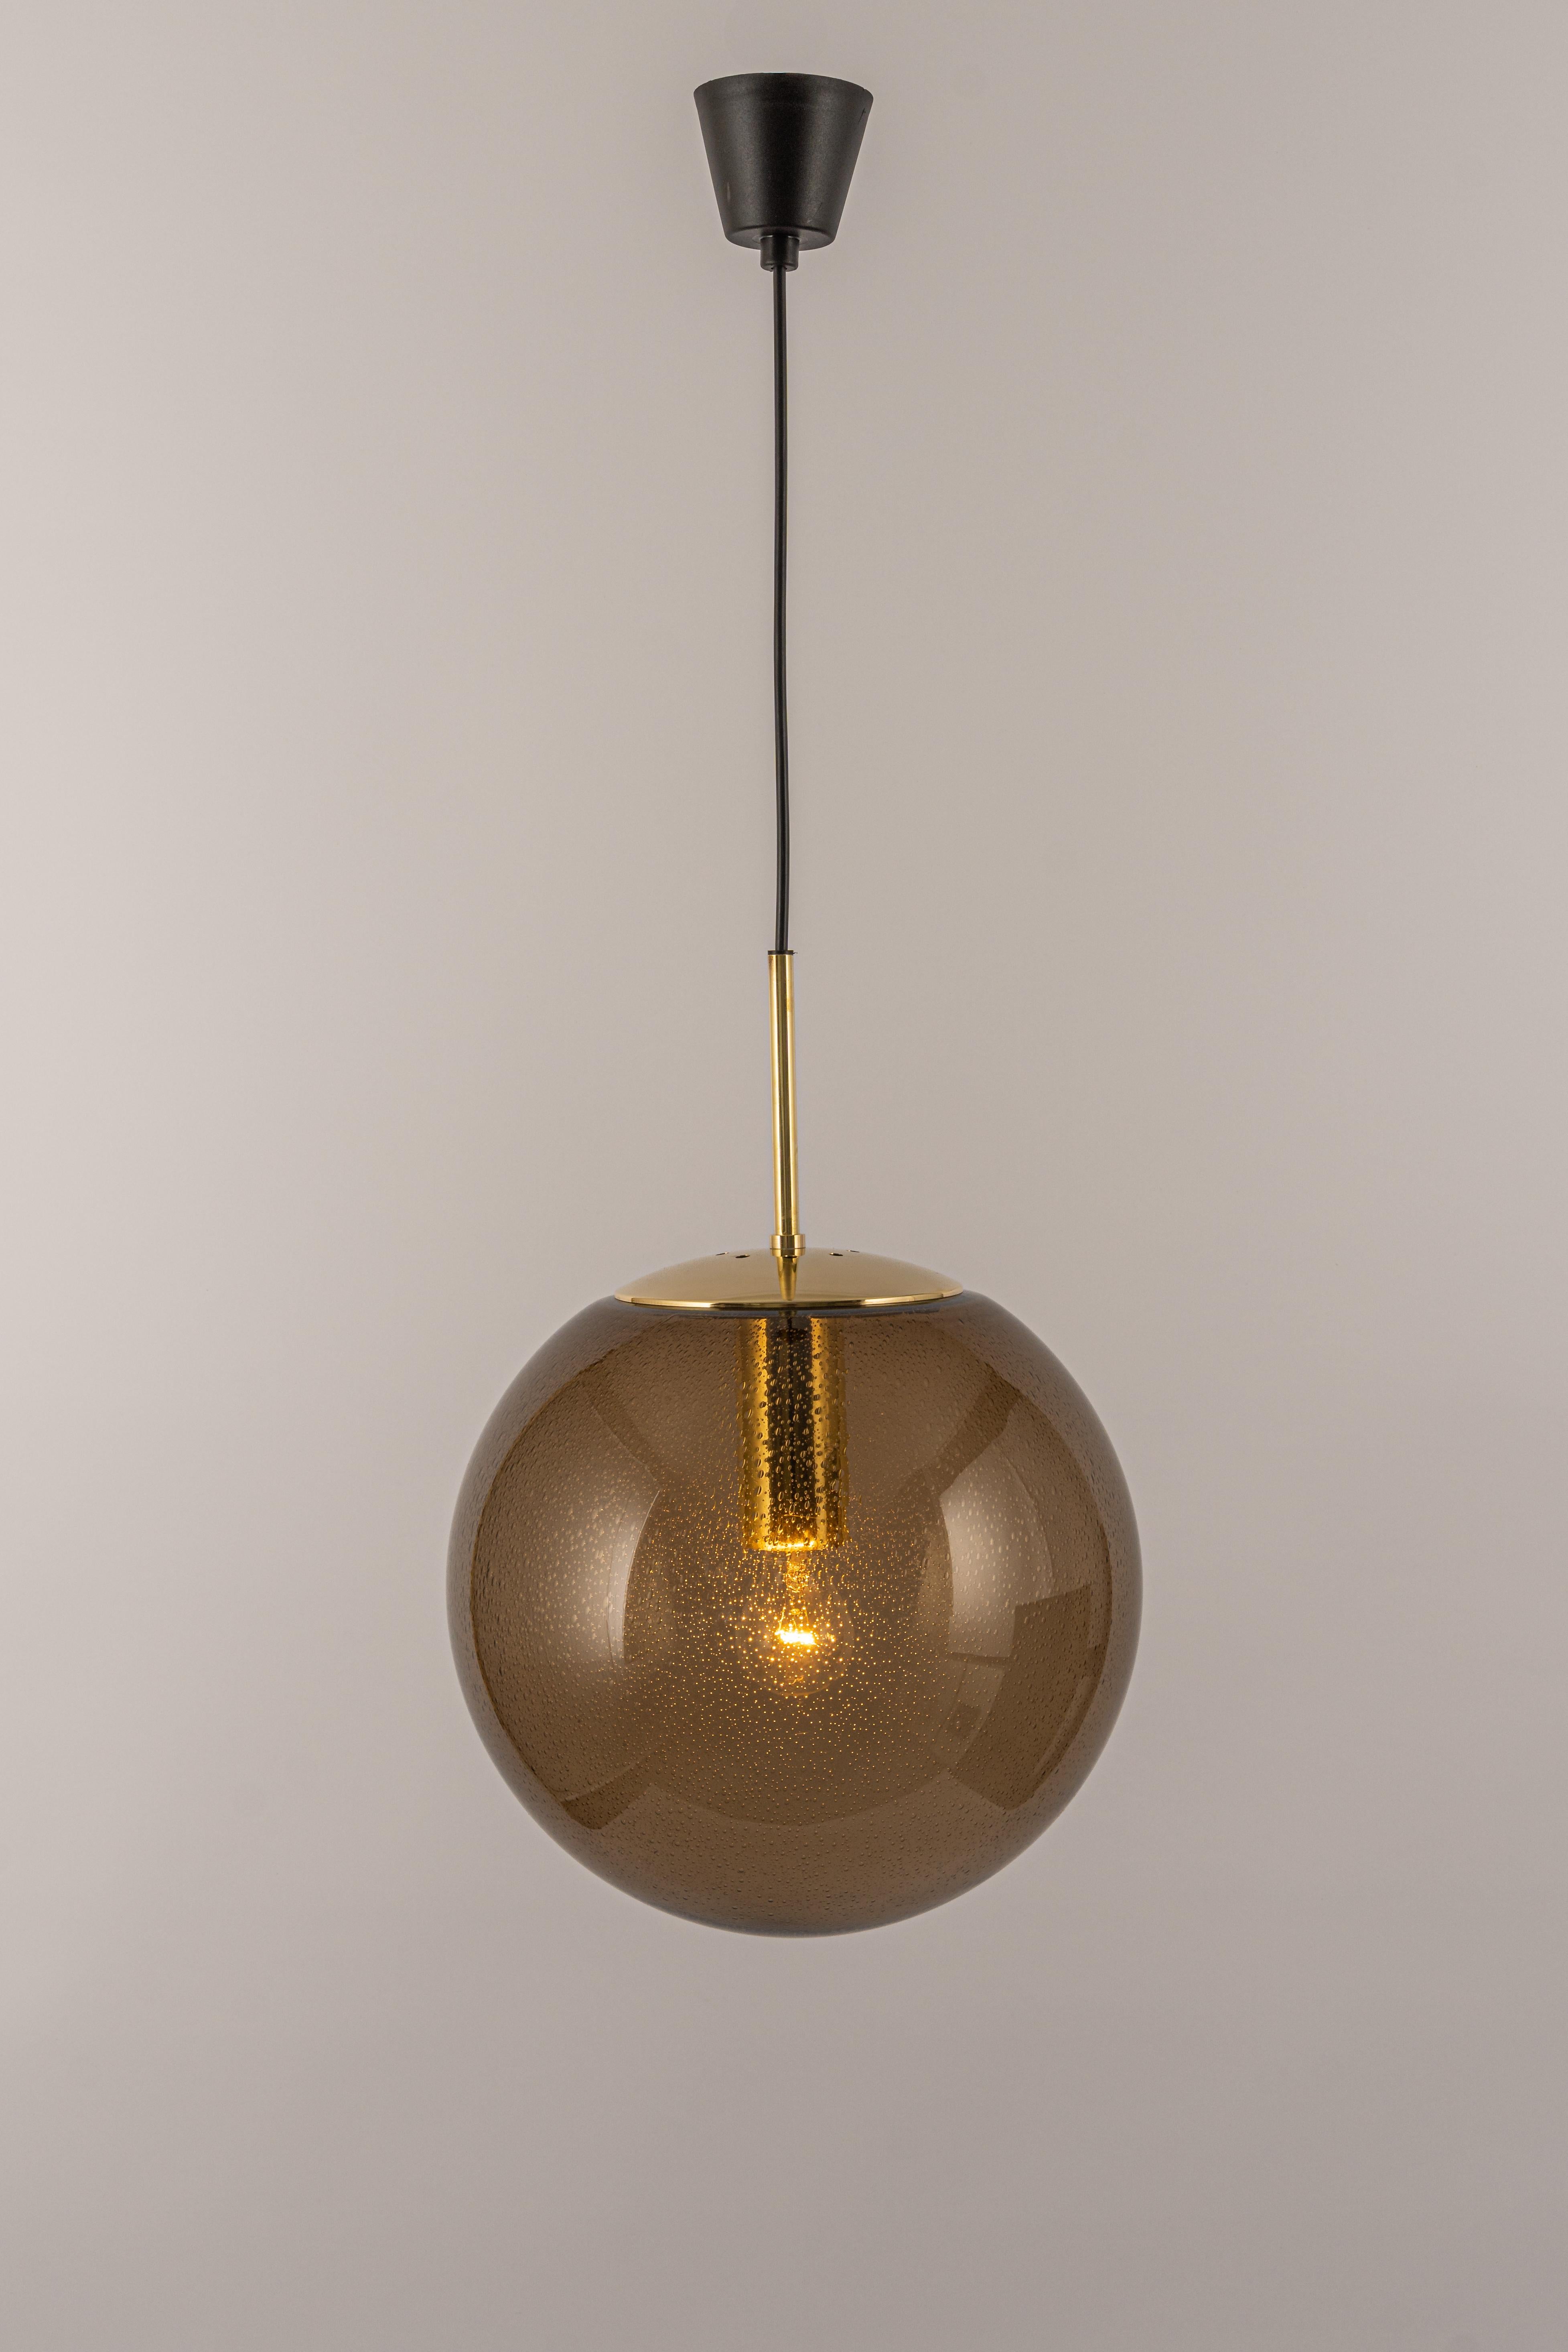 Large Limburg Brass with Smoked Glass Ball Pendant, Germany, 1970s For Sale 1